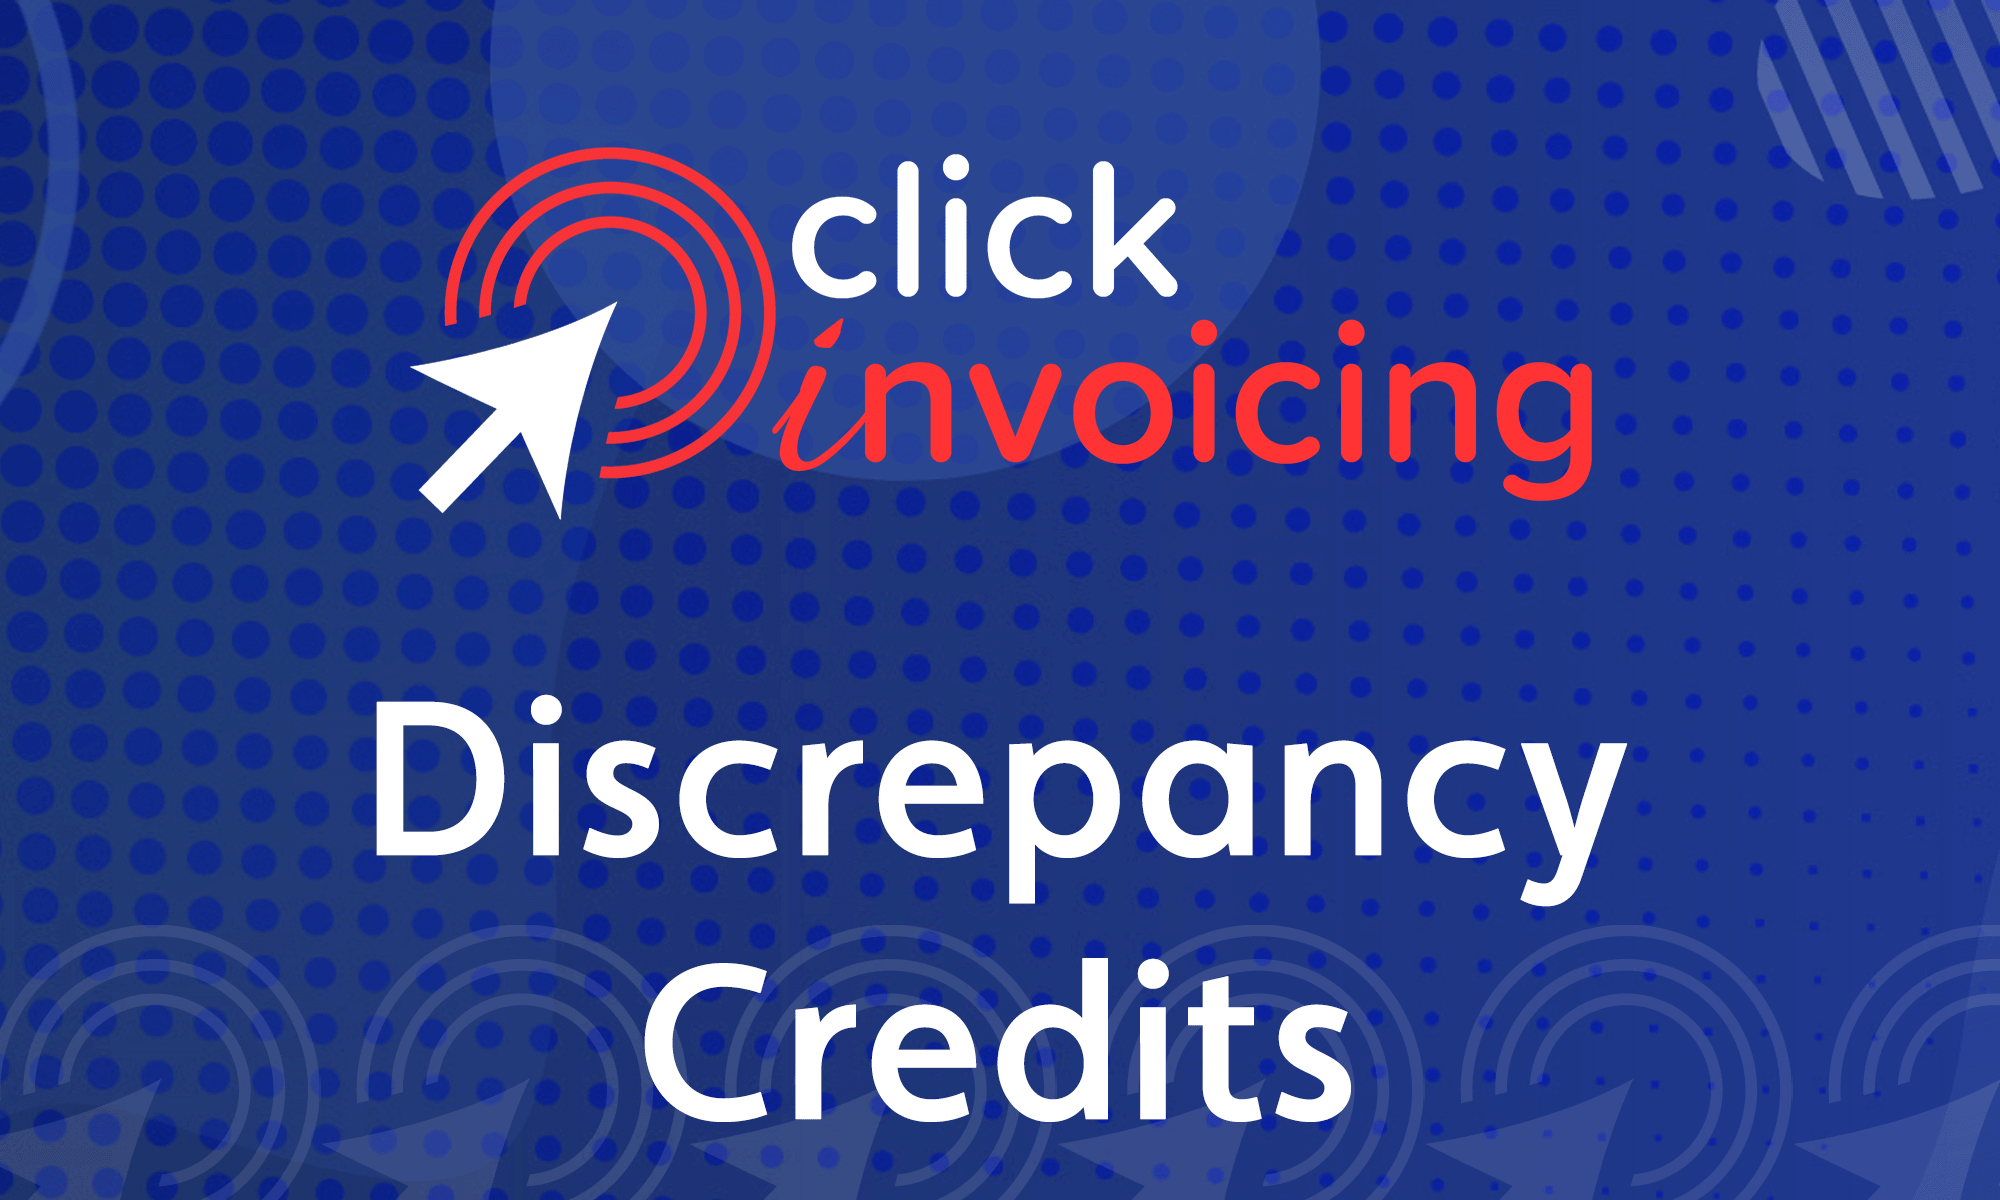 Featured image for “Discrepancy Credits”